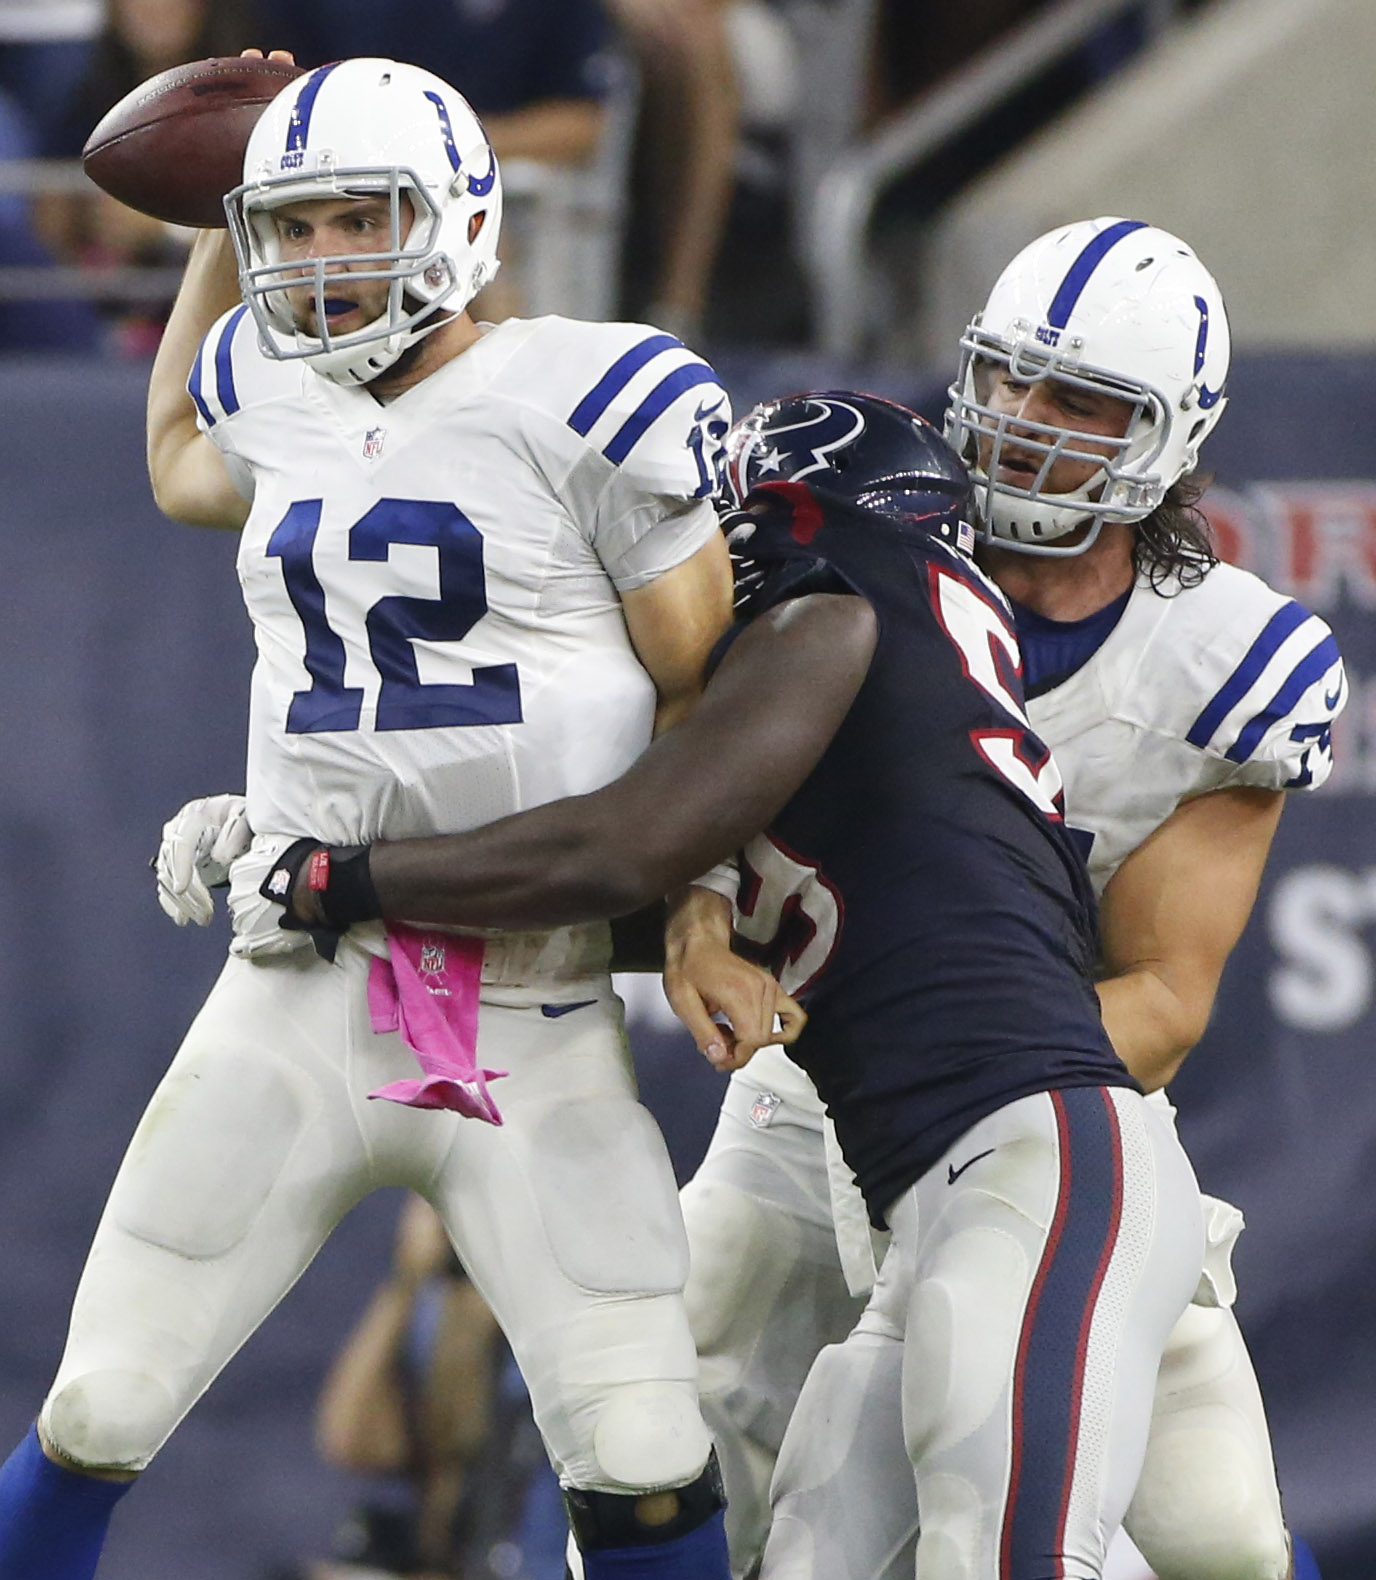 Stephanie Stradley's Texans vs. Colts Q&A with Nate Dunlevy